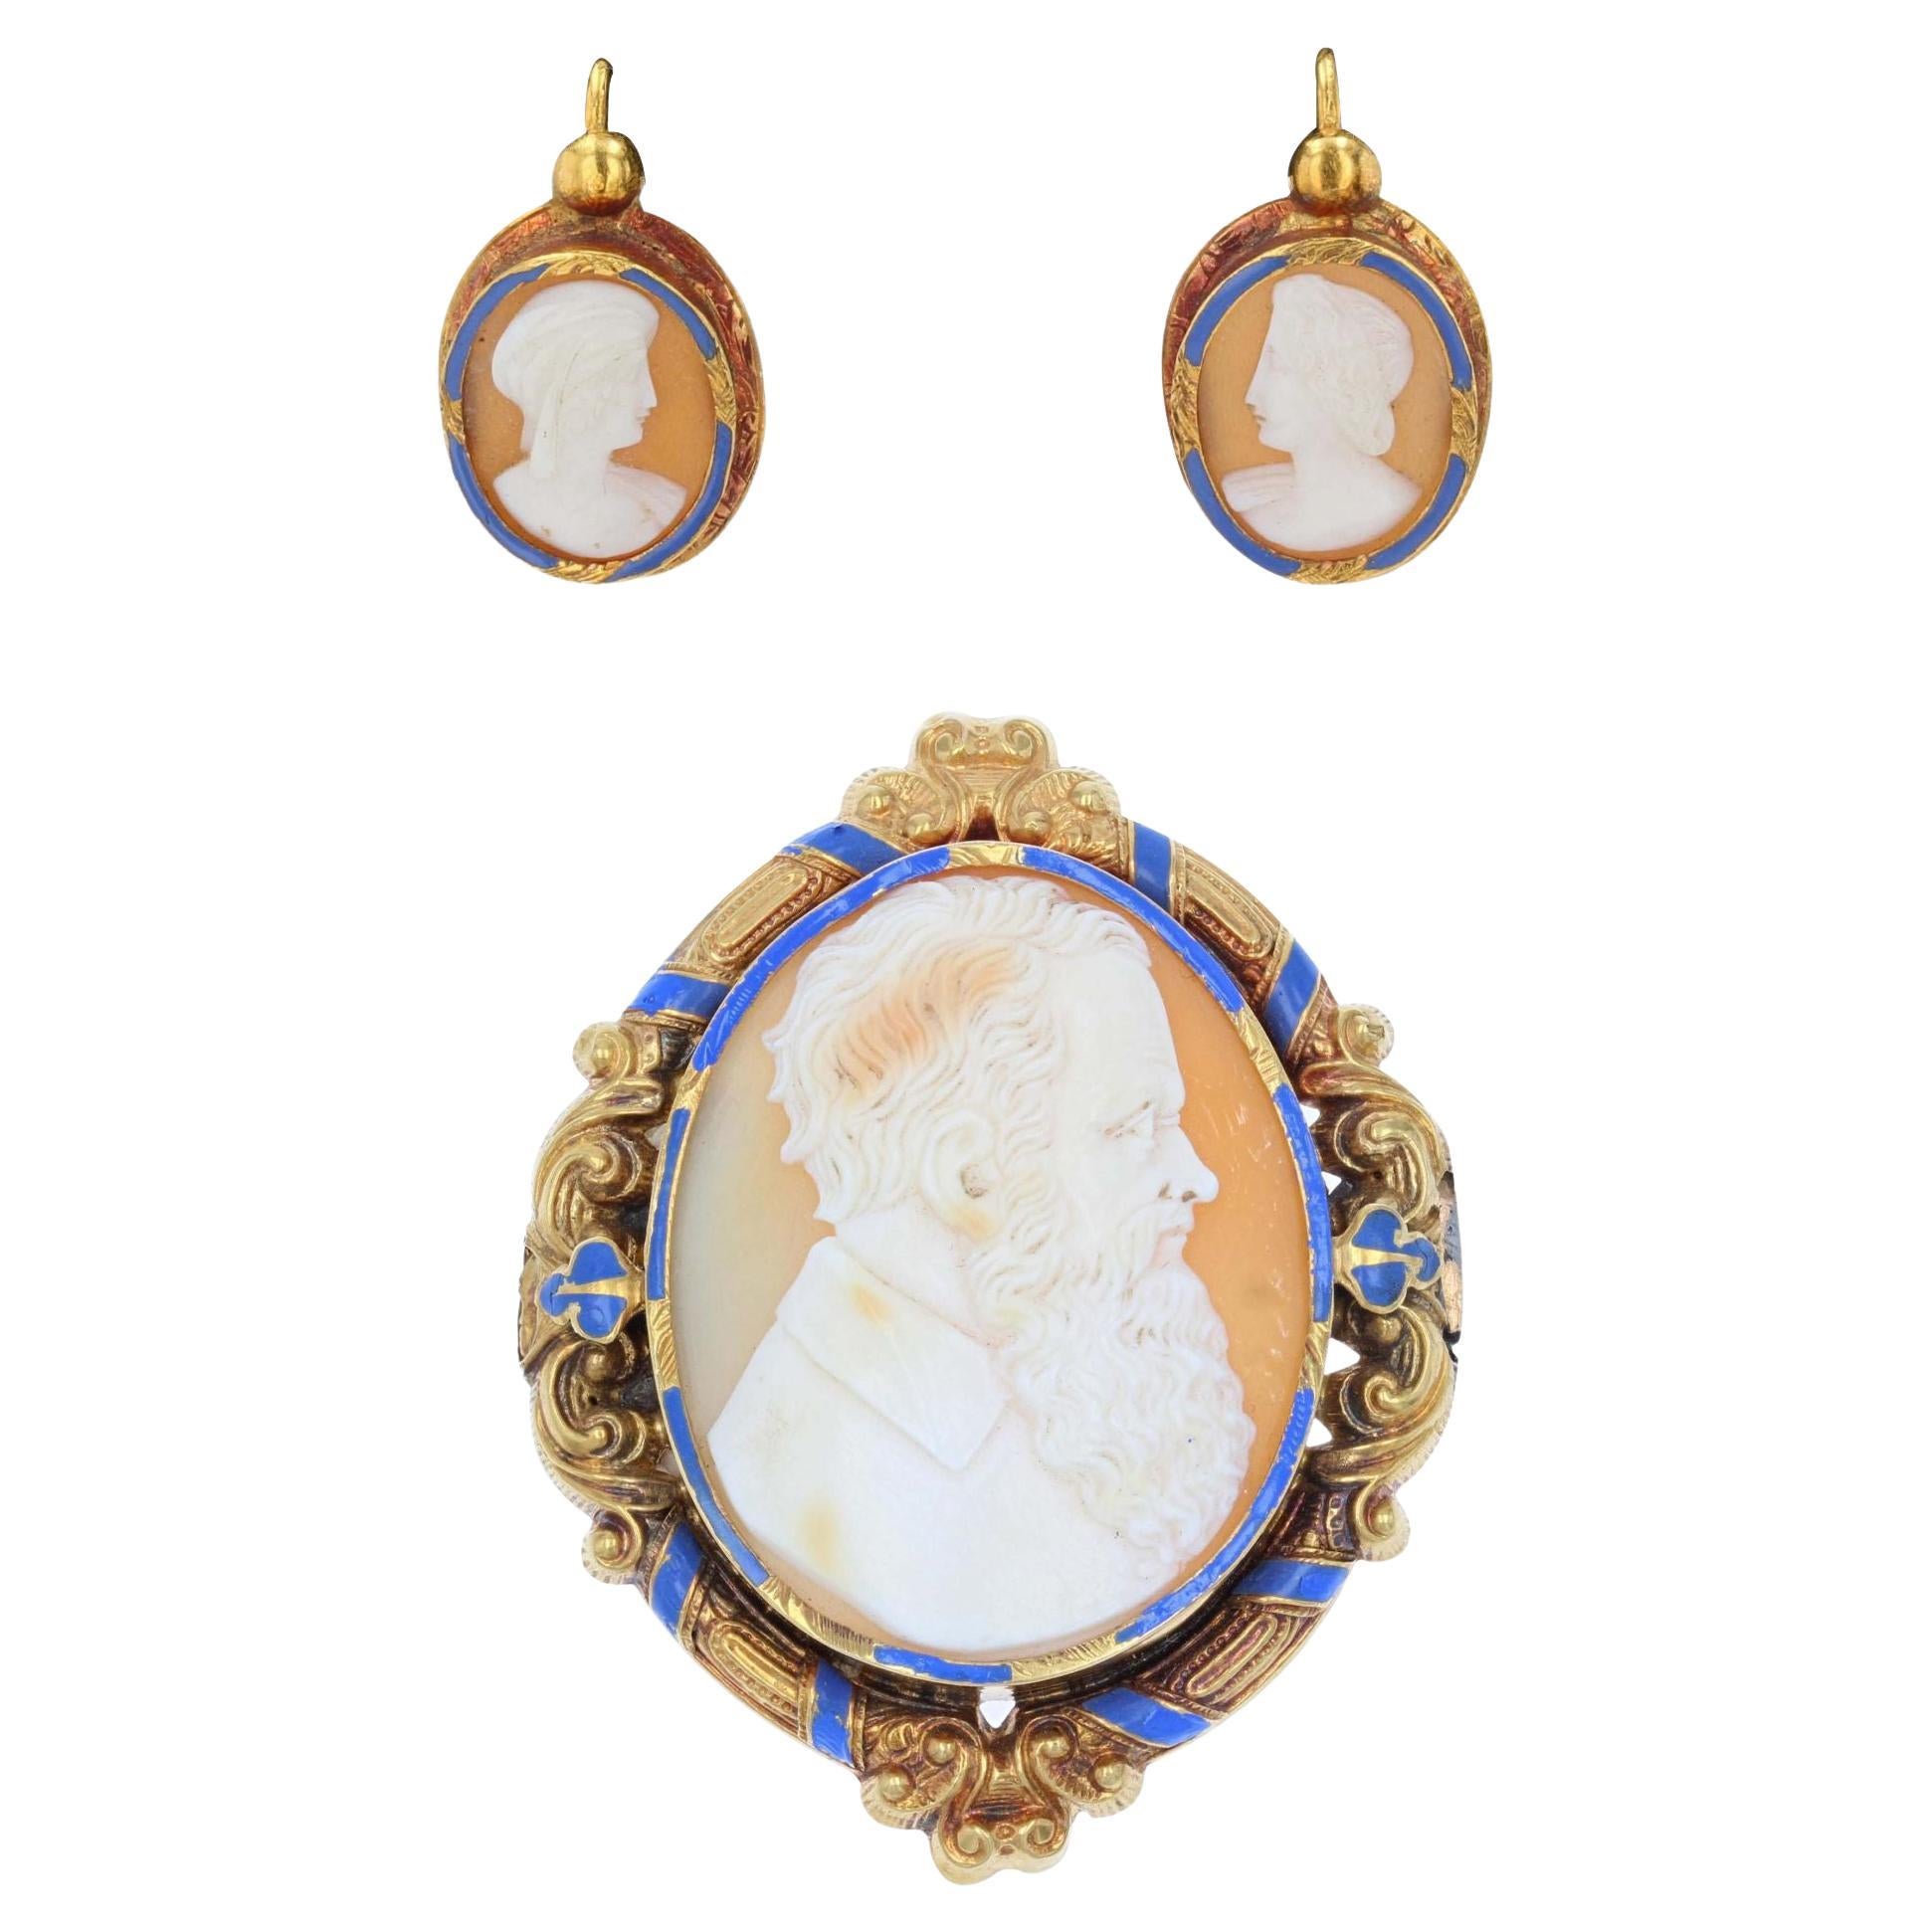 Details about   CAMEO SET PENDANT and EARRINGS made with VINTAGE CAMEO Victorian Revival 